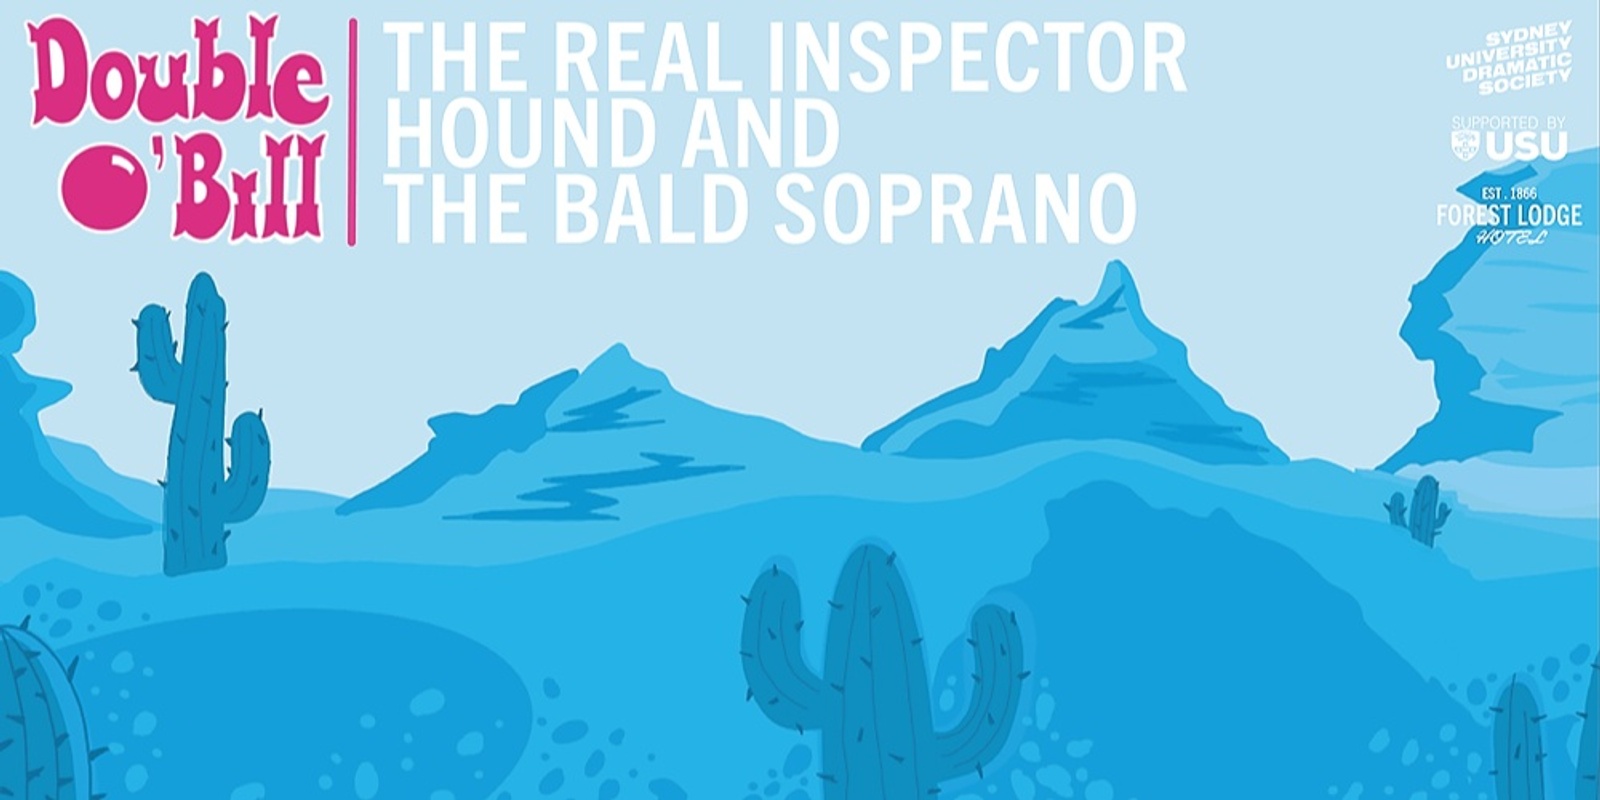 Banner image for SUDS Presents: Double O'Bill - The Real Inspector Hound and The Bald Soprano